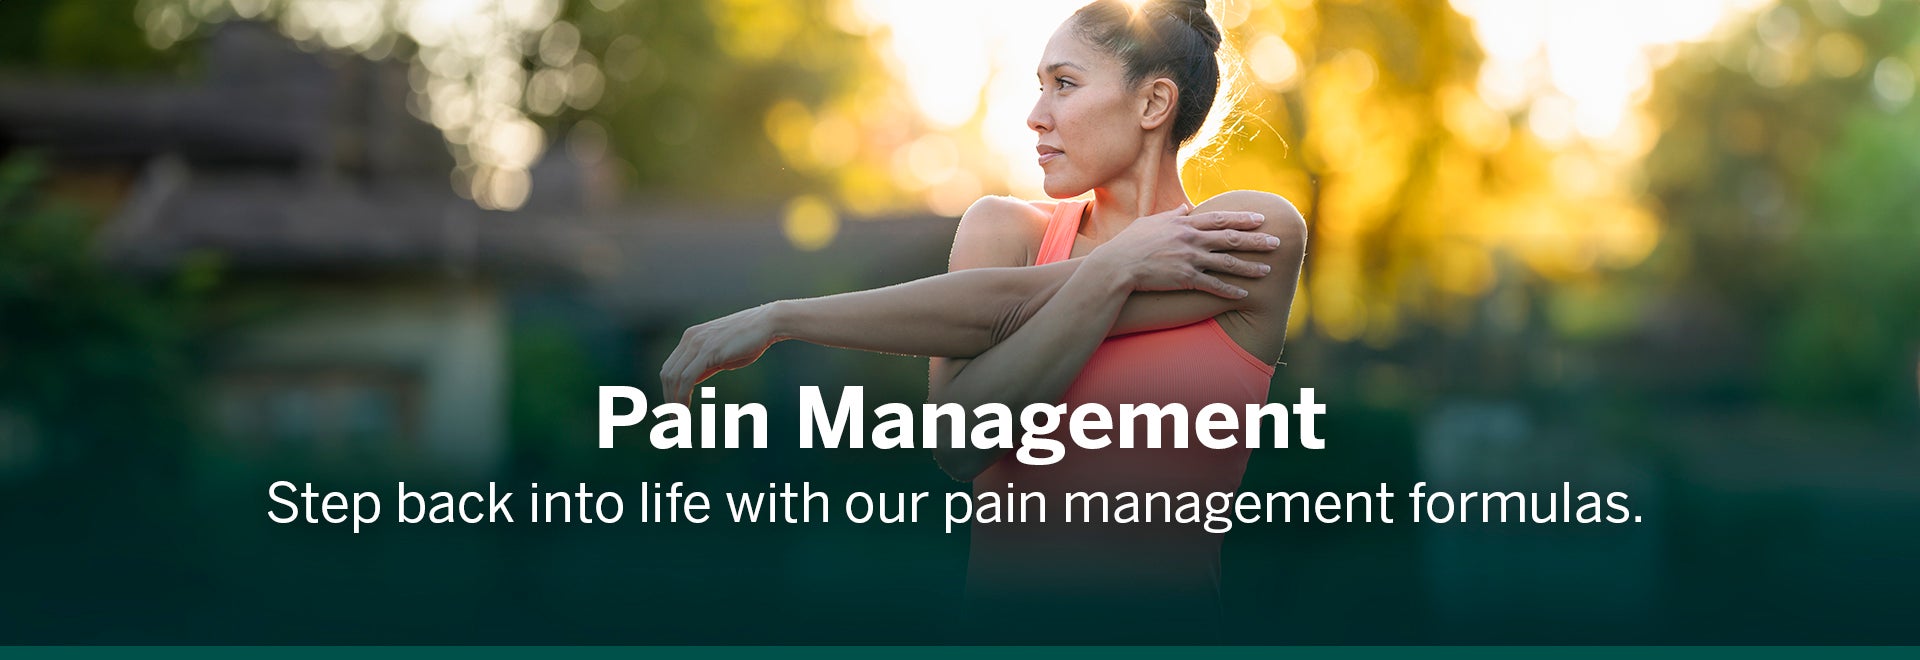 Women stretching her arms outside with text on image saying pain management. Step back into life with Genestra pain management formulas.